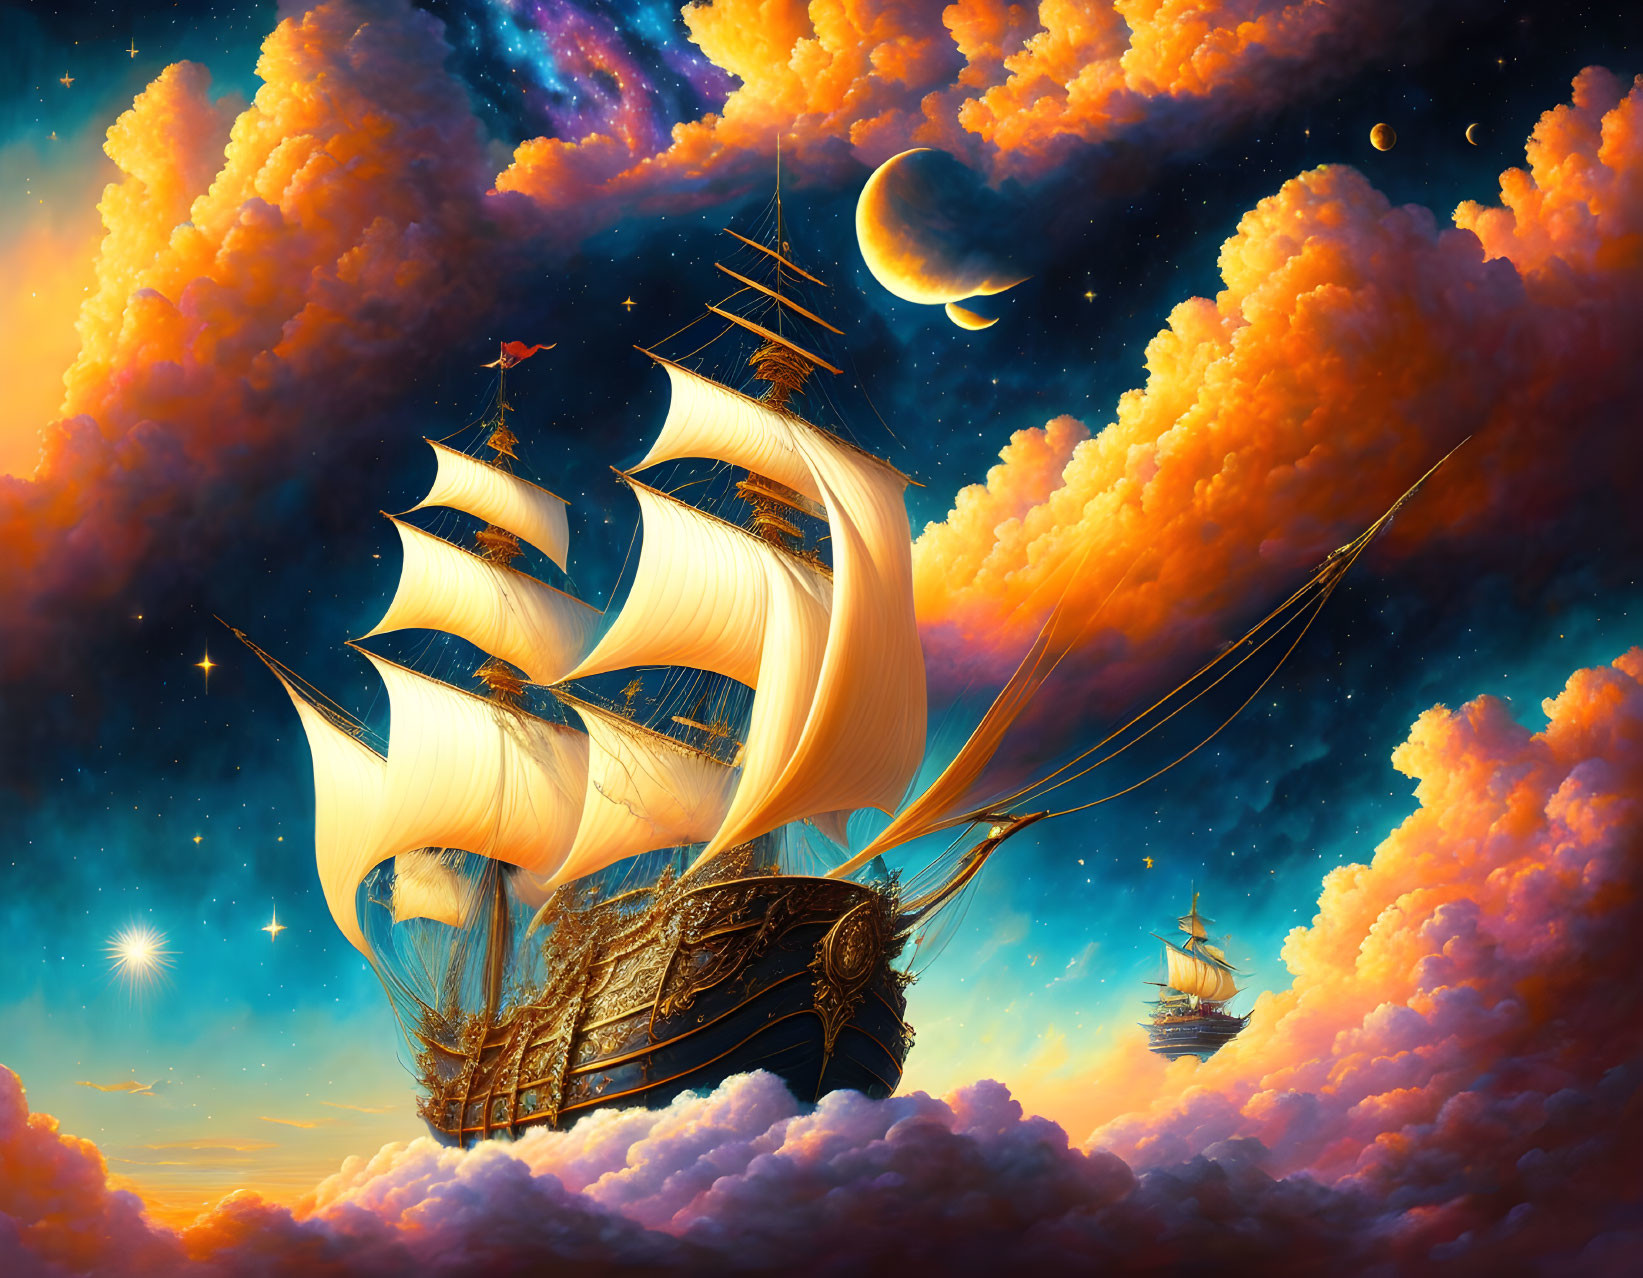 Fantasy scene of sailing ships in sky with planets and stars